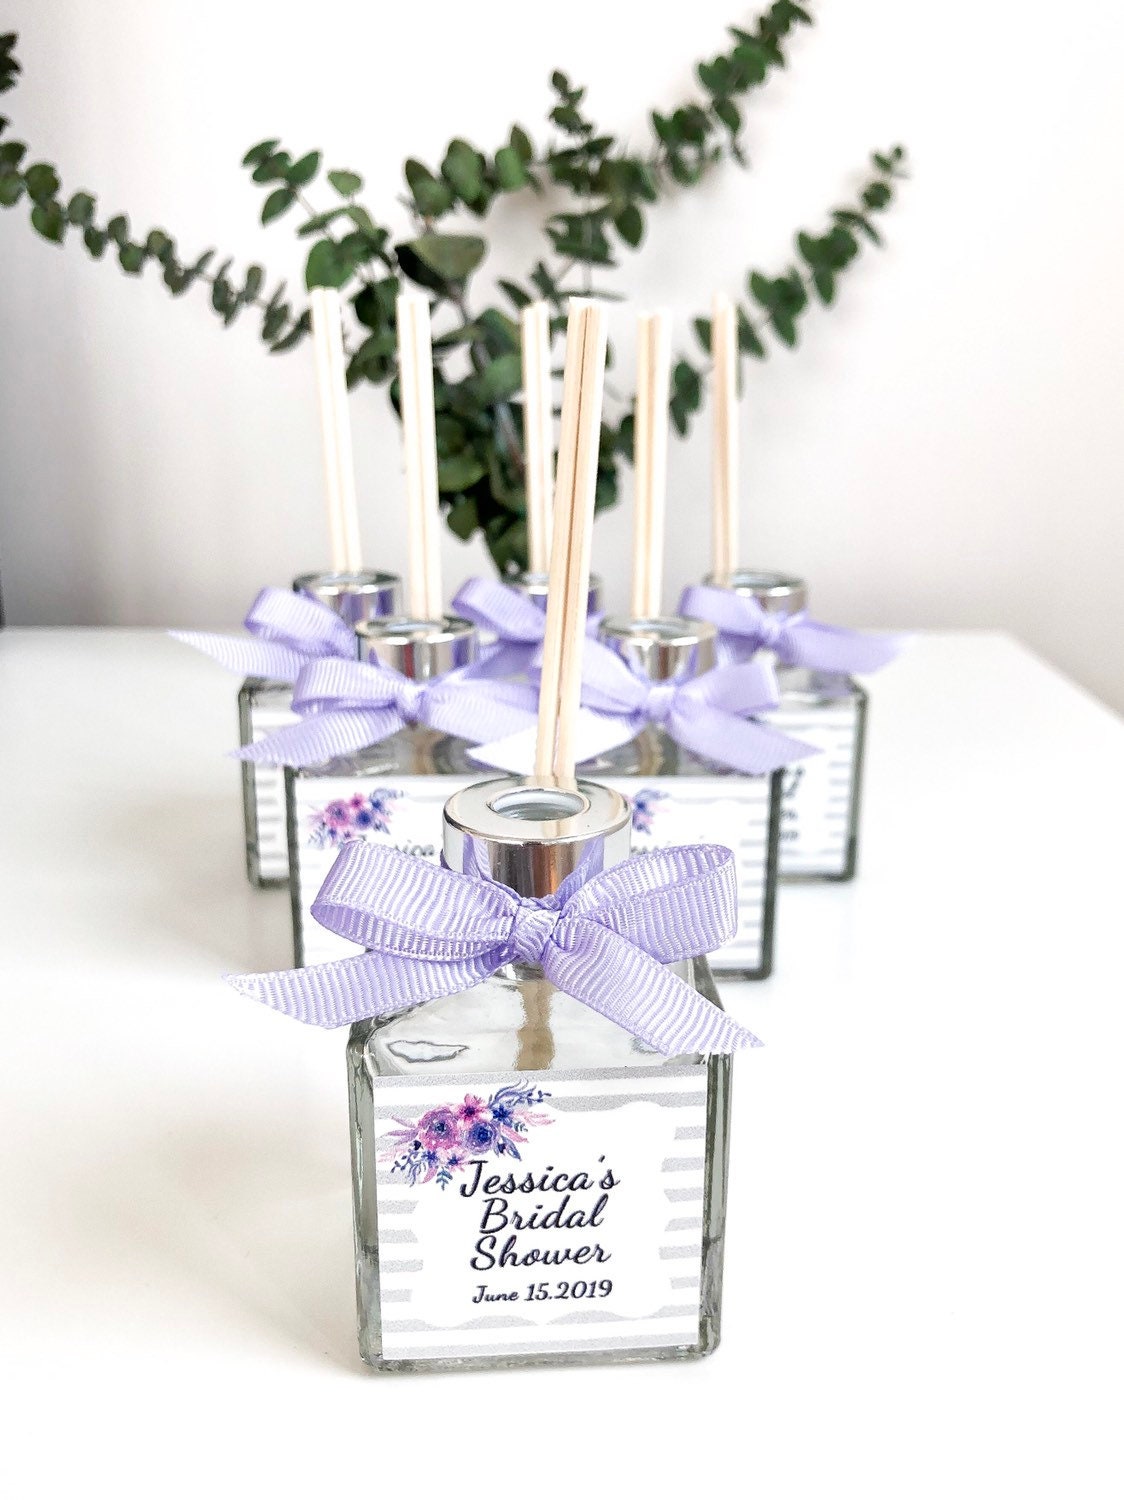 Bridal Shower Gift Ideas: How to Pamper the Bride-to-Be – Goose